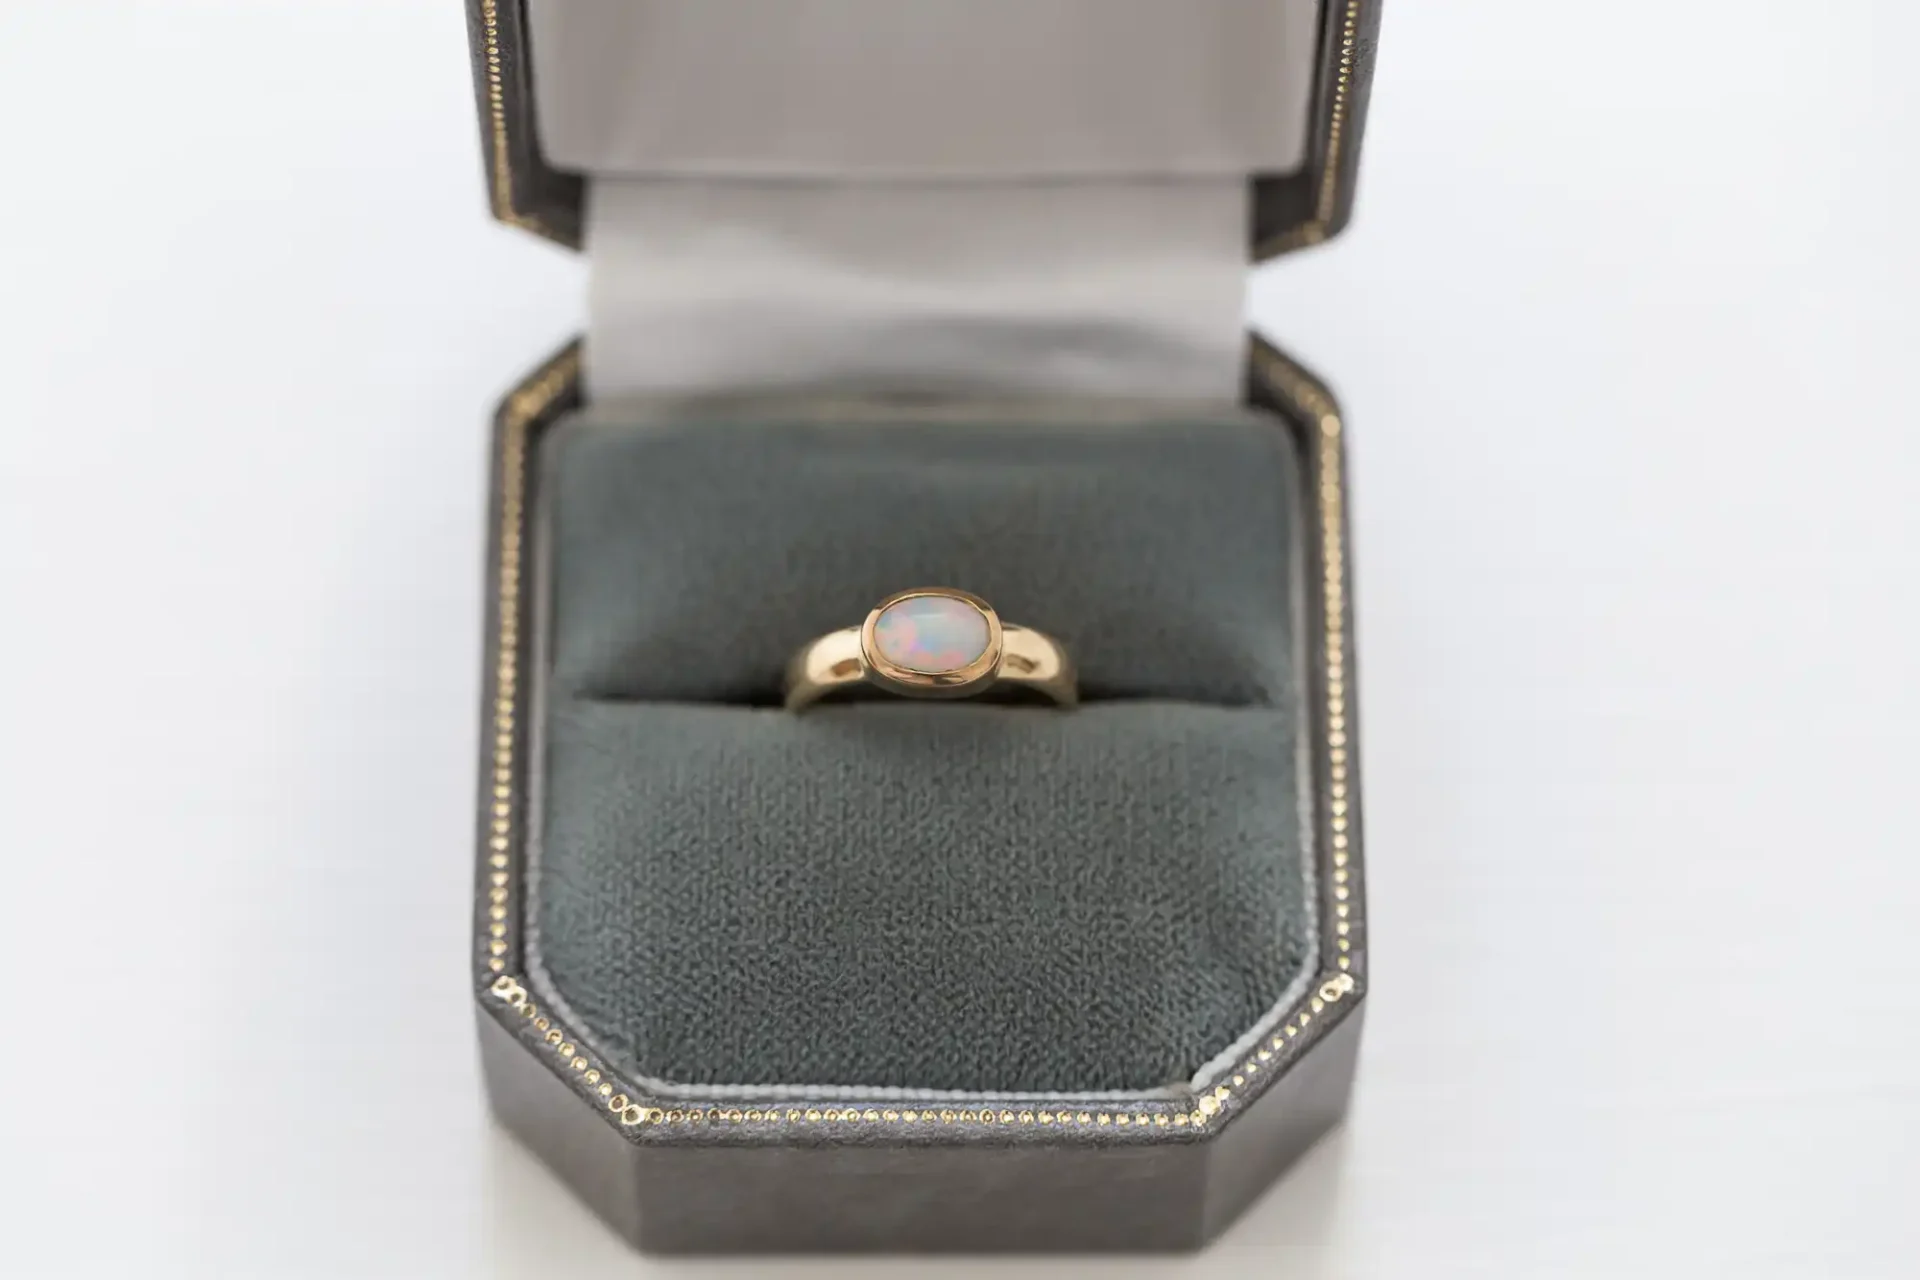 Gold ring with an opal stone set in a gray padded jewelry box on a white background.